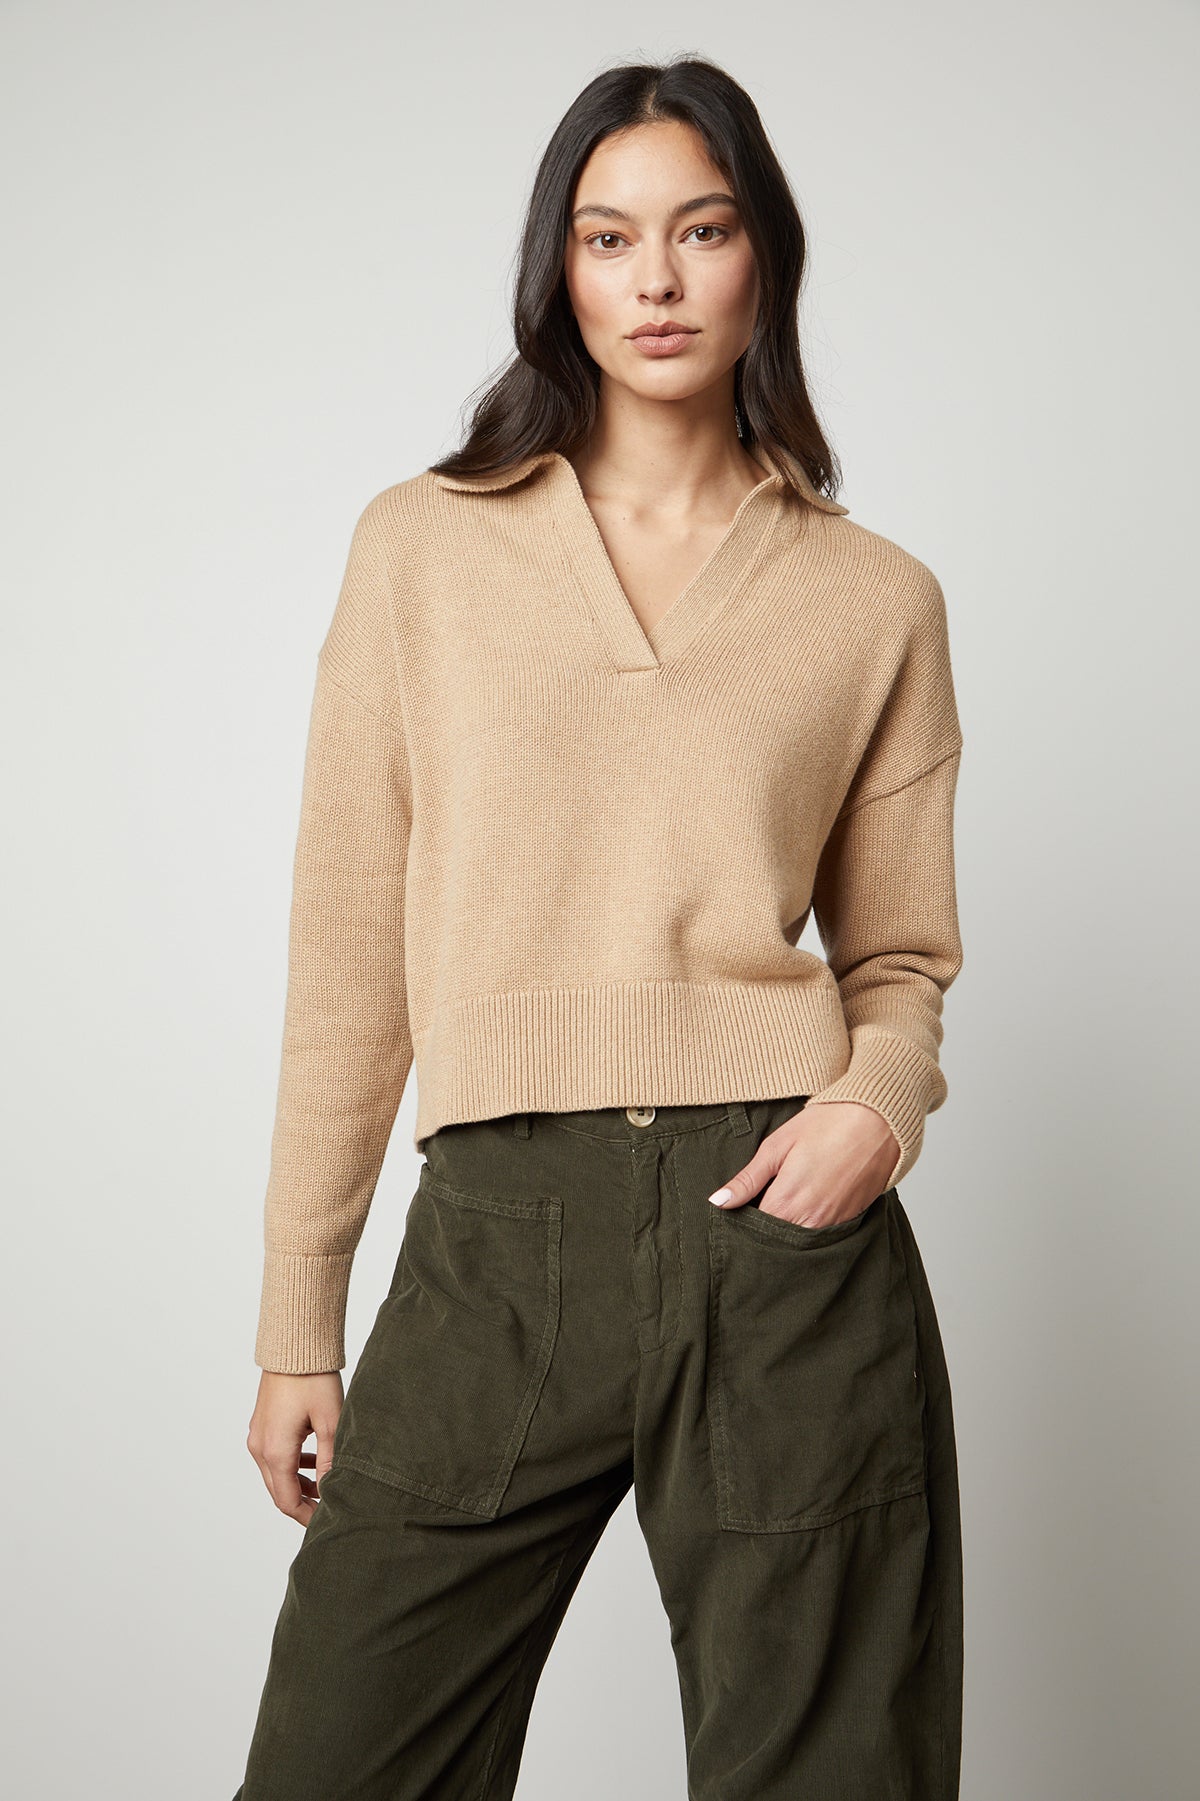 The model is wearing a layered LUCIE POLO SWEATER by Velvet by Graham & Spencer with a ribbed V-neckline, paired with olive pants.-35503525986497